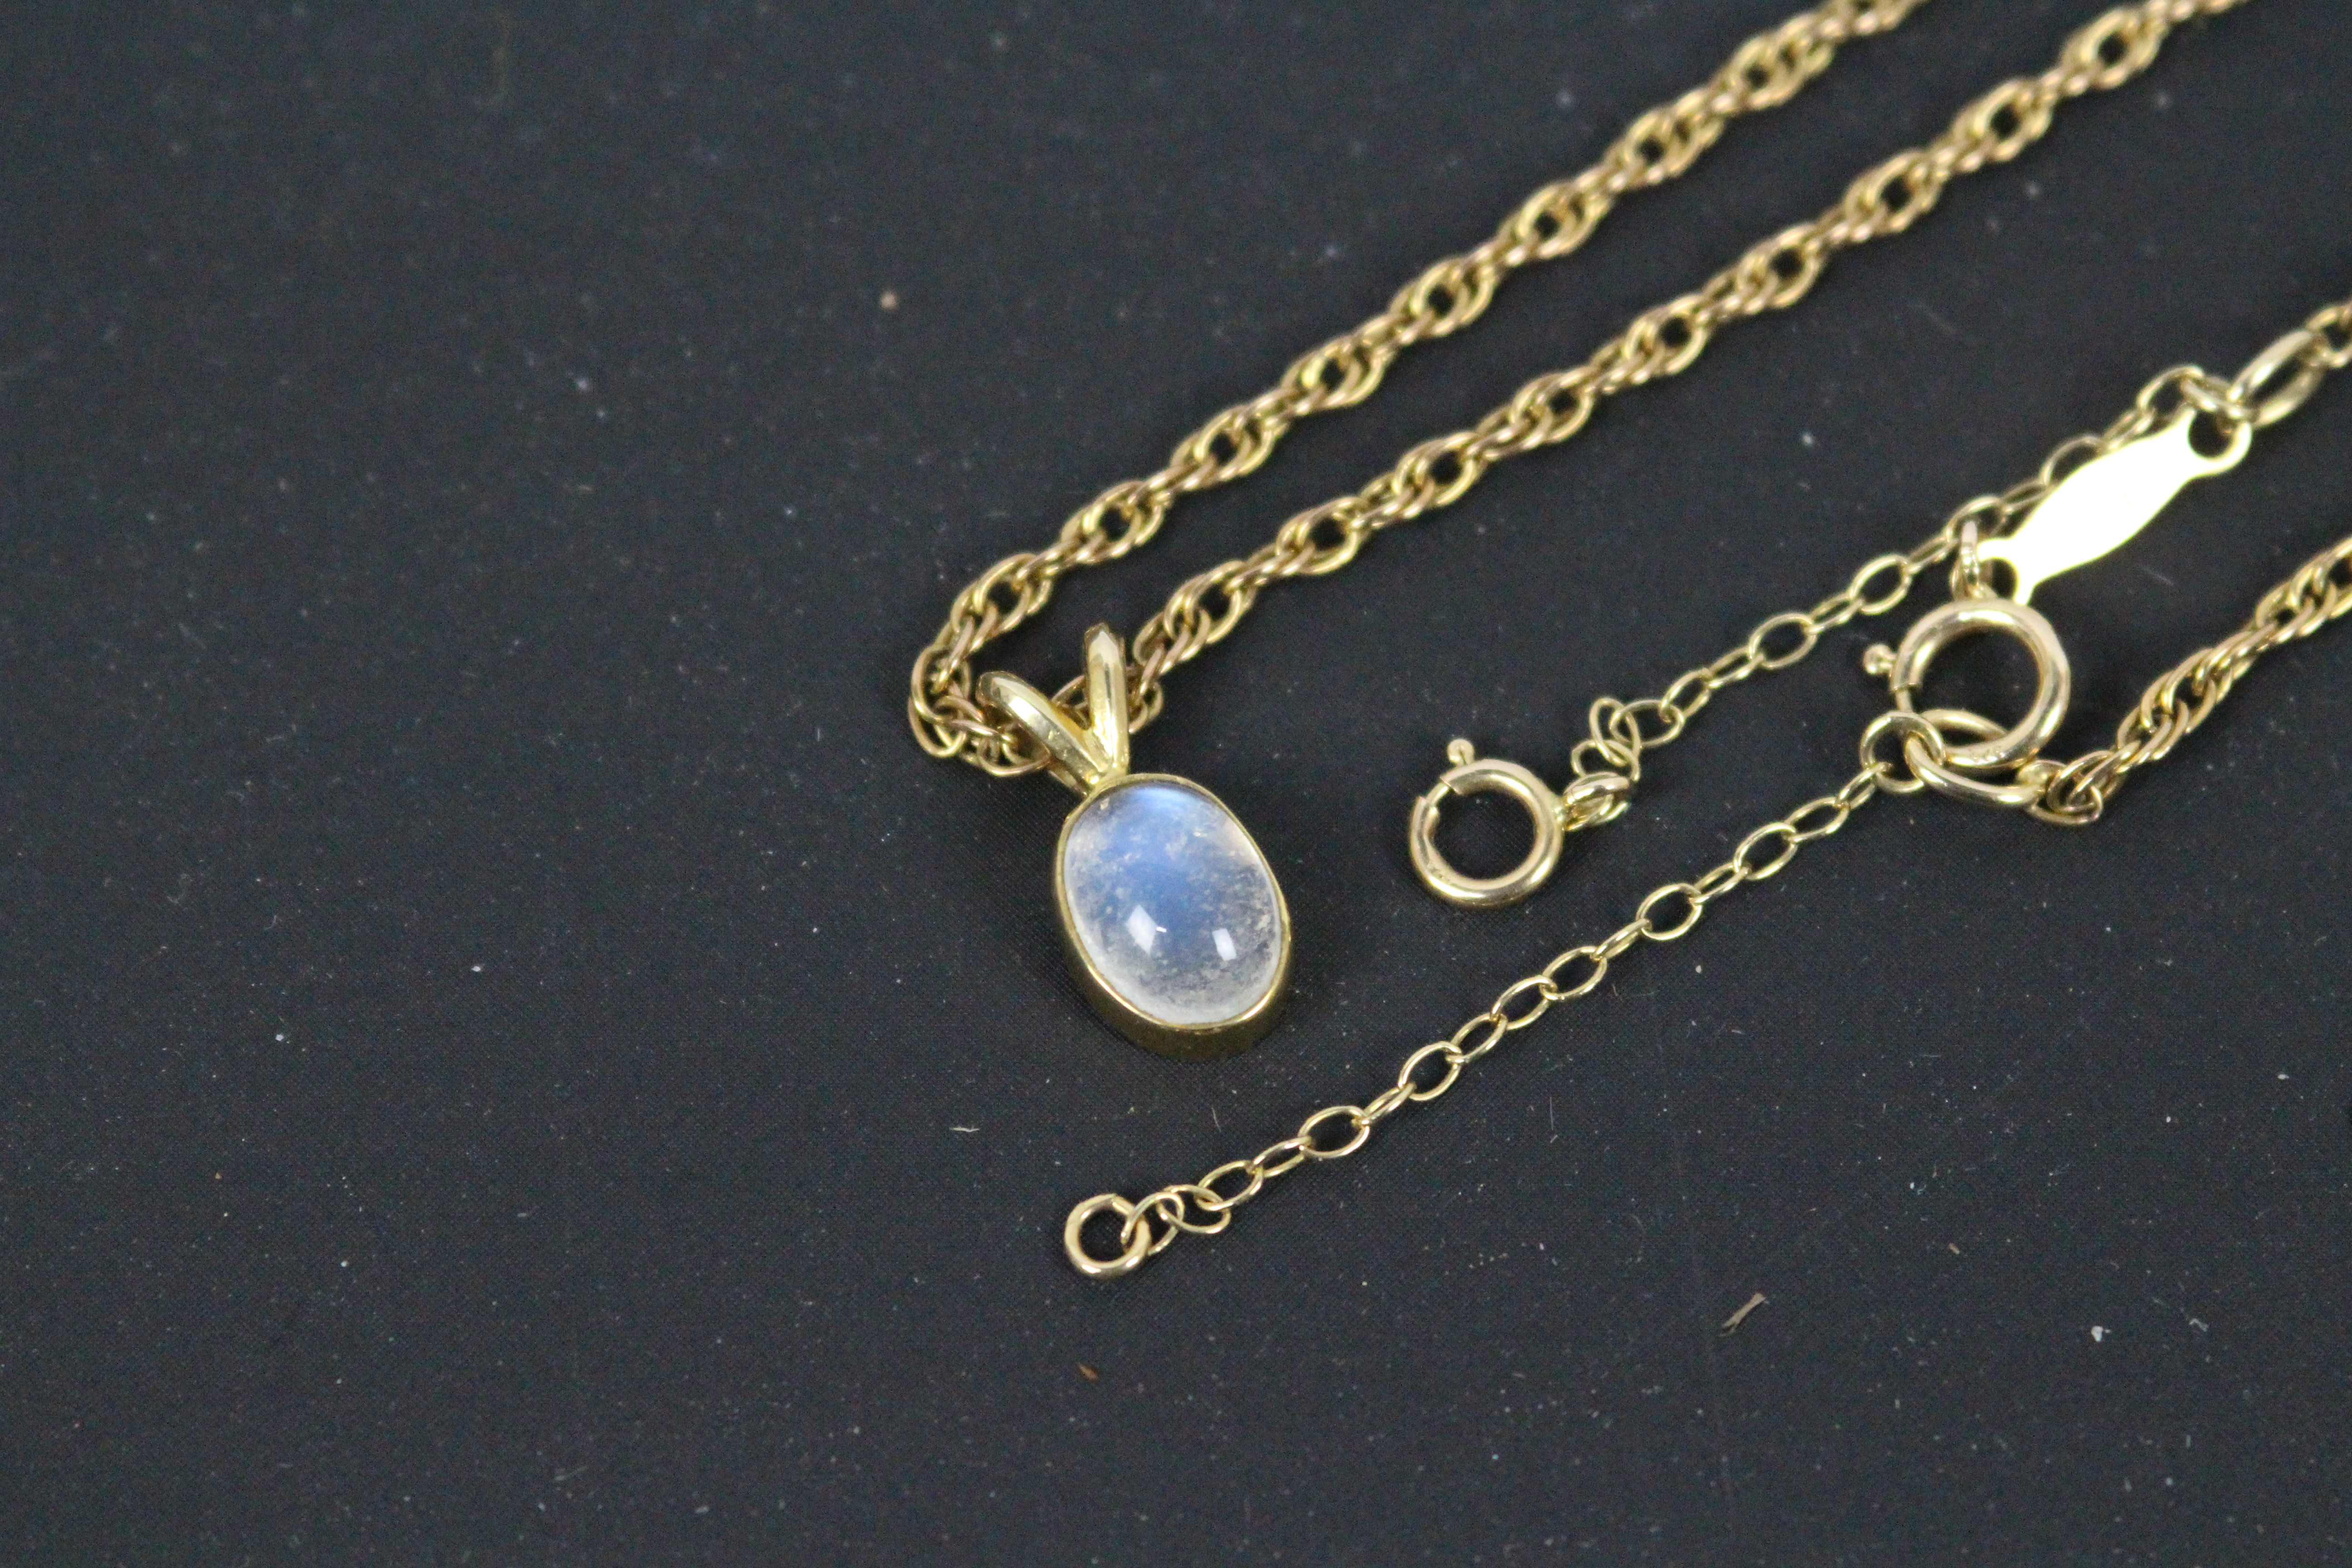 A 9ct yellow gold and cabochon moonstone pendant on 9ct gold Prince Of Wales chain (54 cm length), - Image 3 of 4